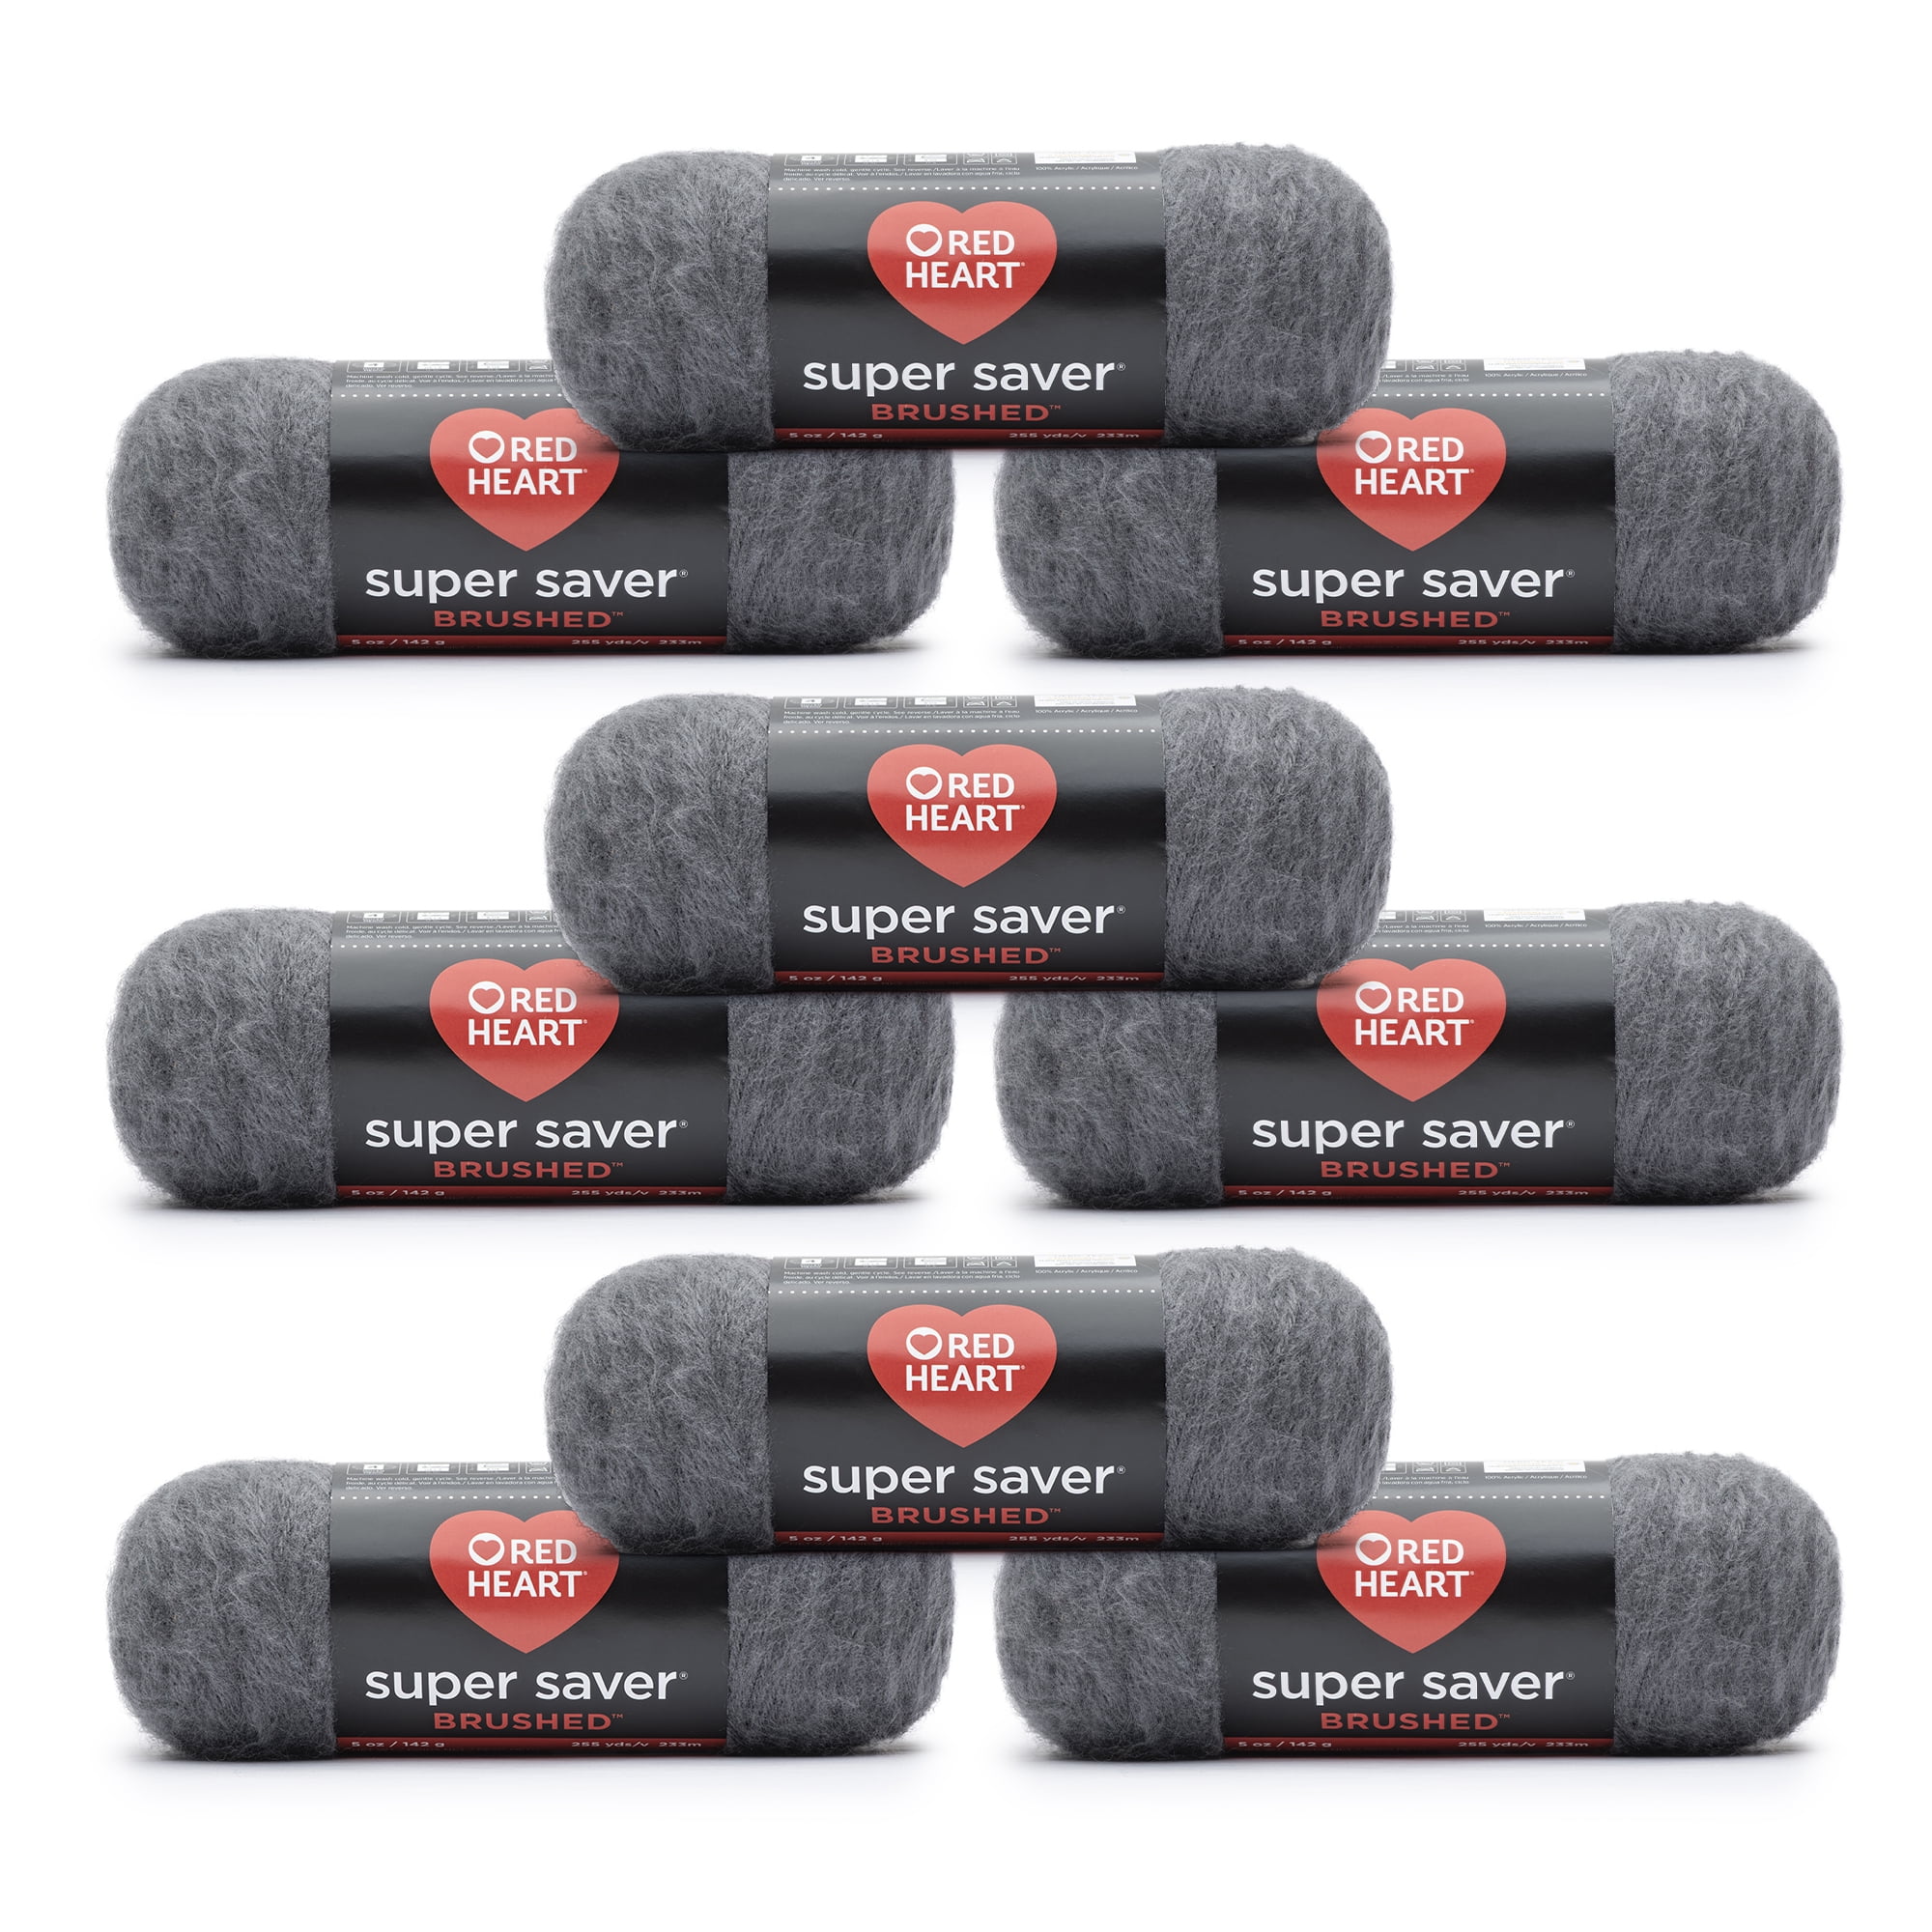 Red Heart® Super Saver® Yarn - Grey Heather, 1 ct - Foods Co.